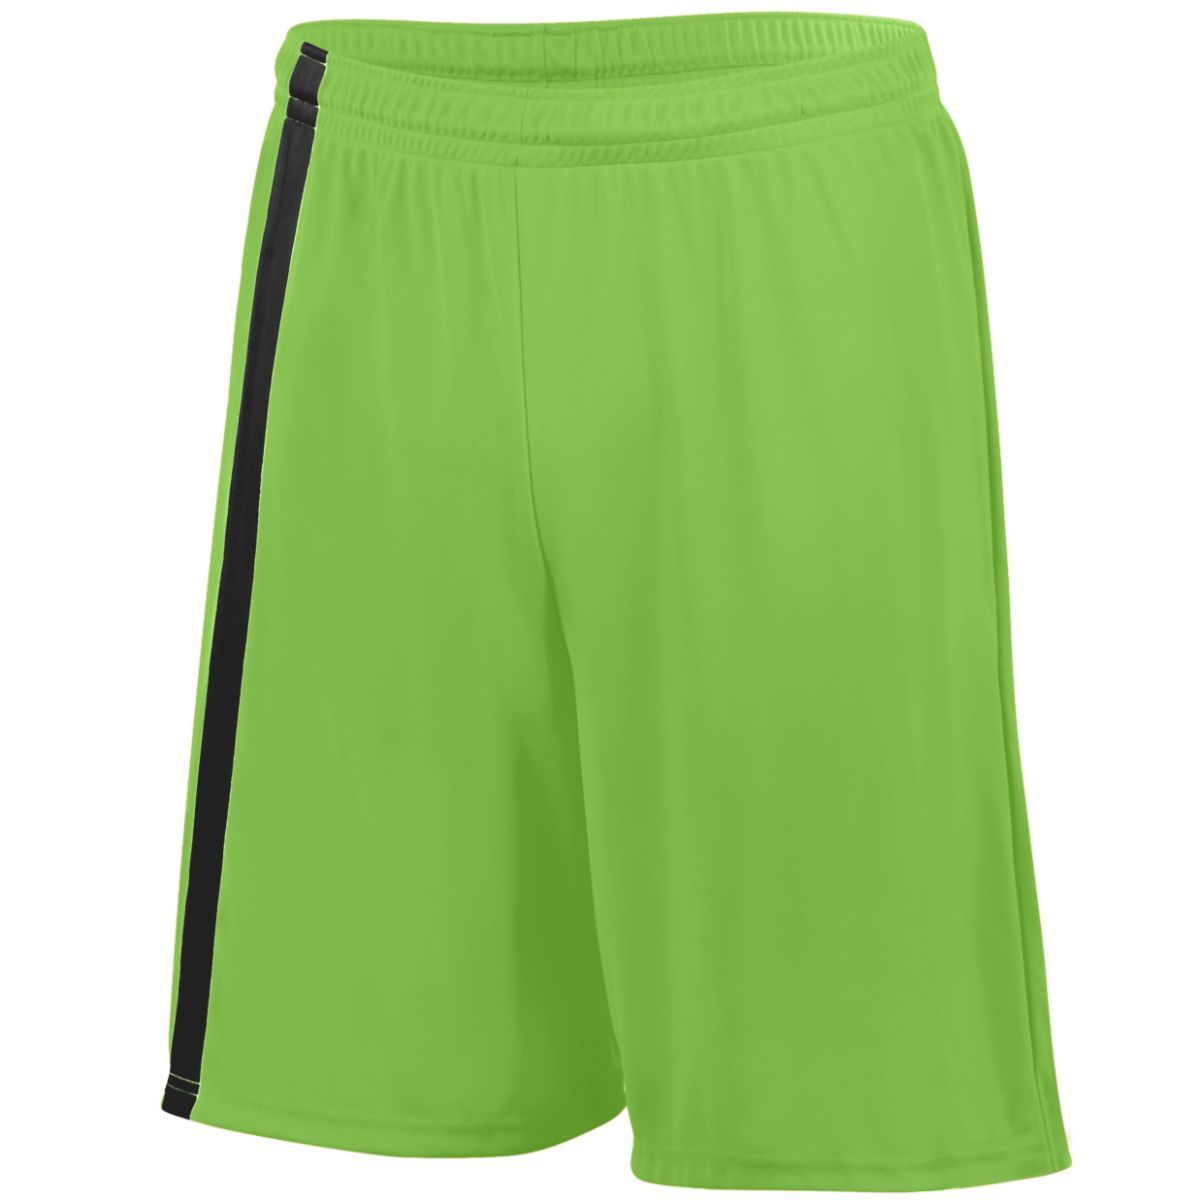 Augusta Sportswear Attacking Third Shorts in Lime/Black  -Part of the Adult, Adult-Shorts, Augusta-Products, Soccer, All-Sports-1 product lines at KanaleyCreations.com